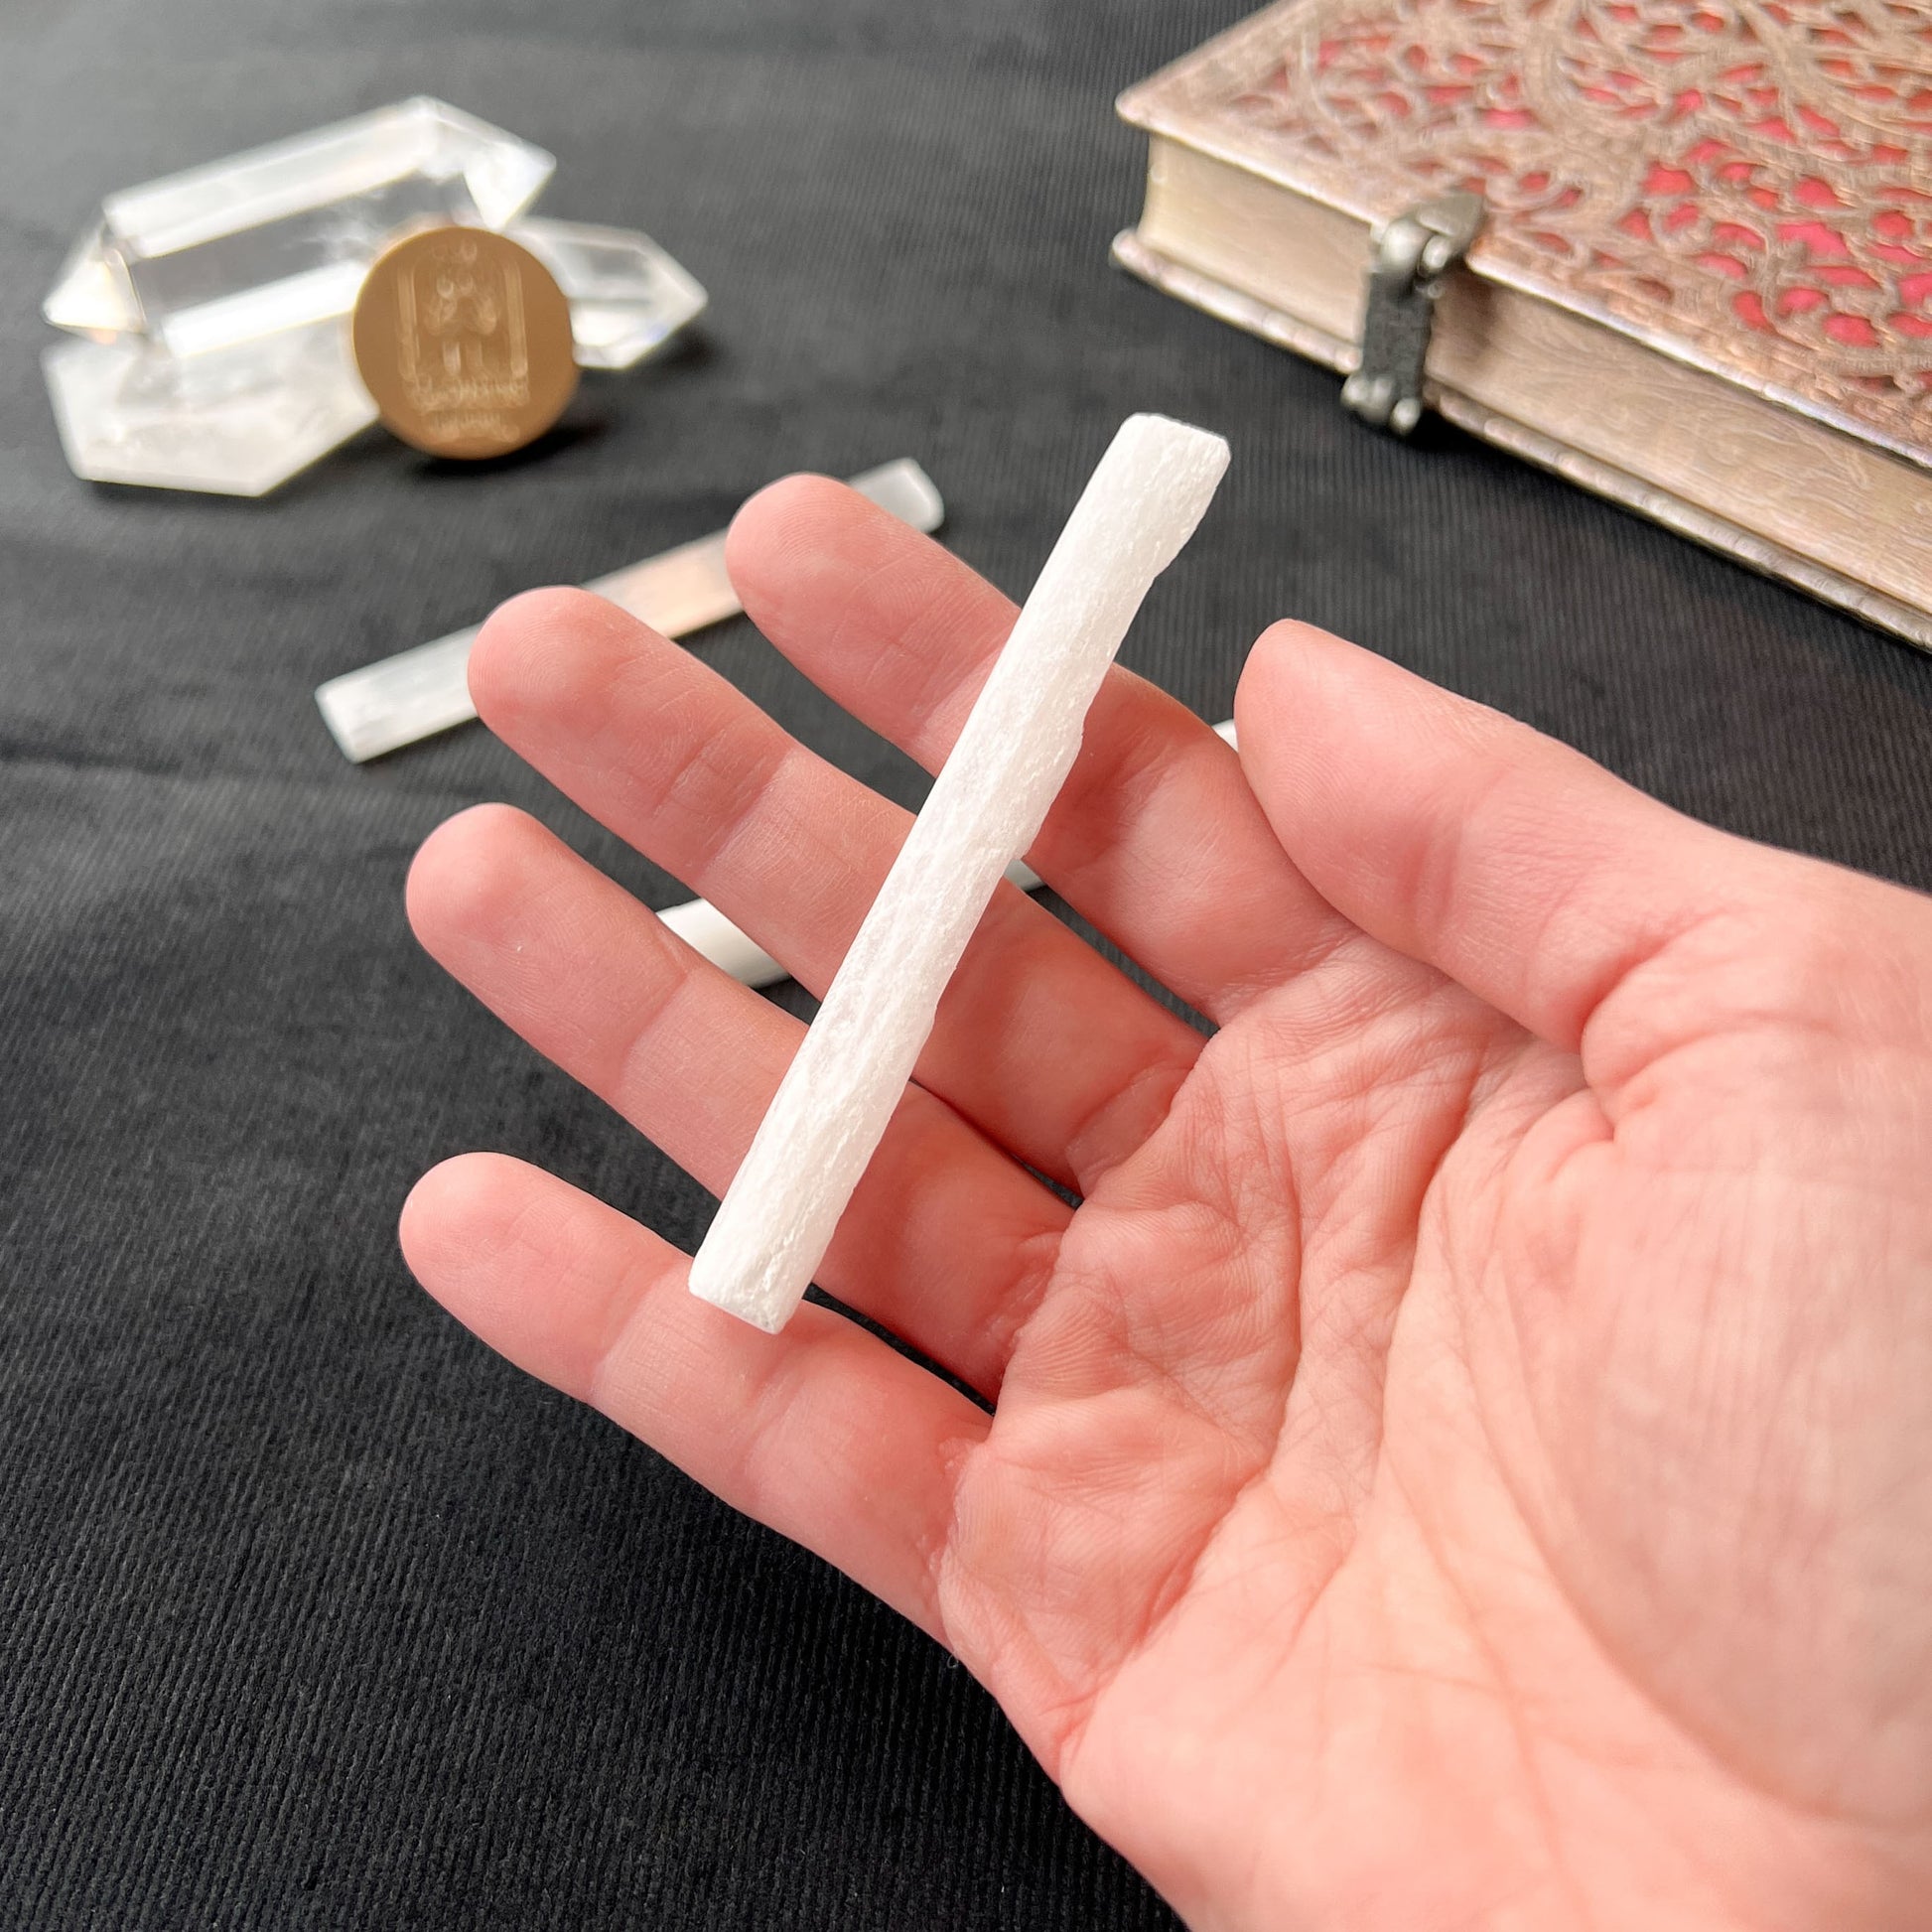 selenite crystal stick for gemstone purification healing witchcraft pagan altar baguette magick